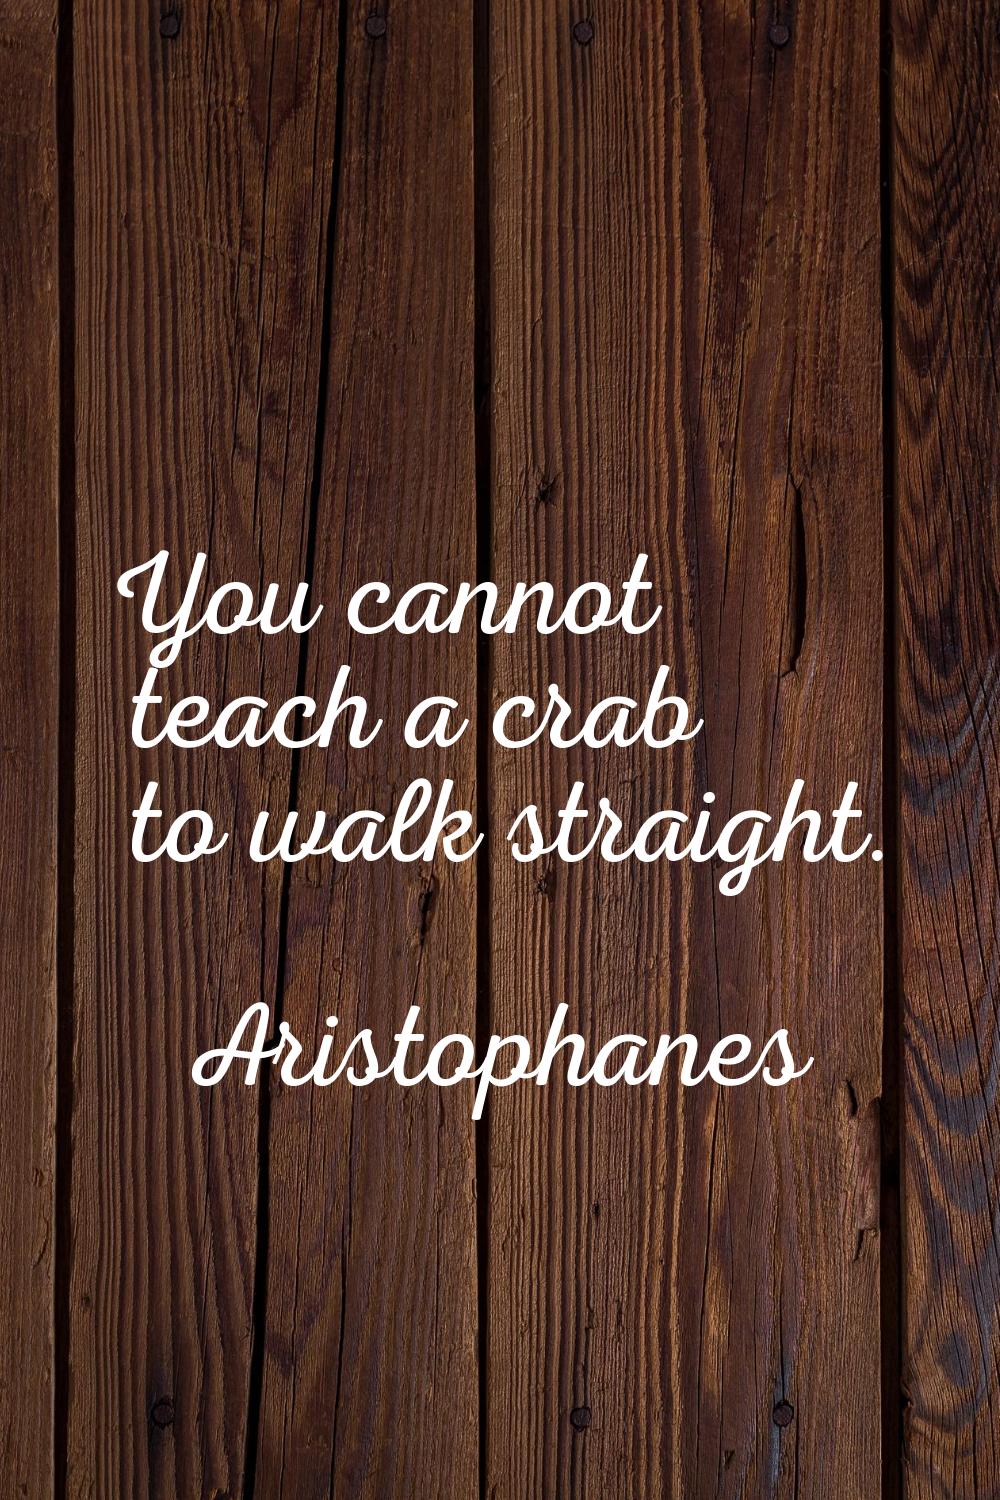 You cannot teach a crab to walk straight.